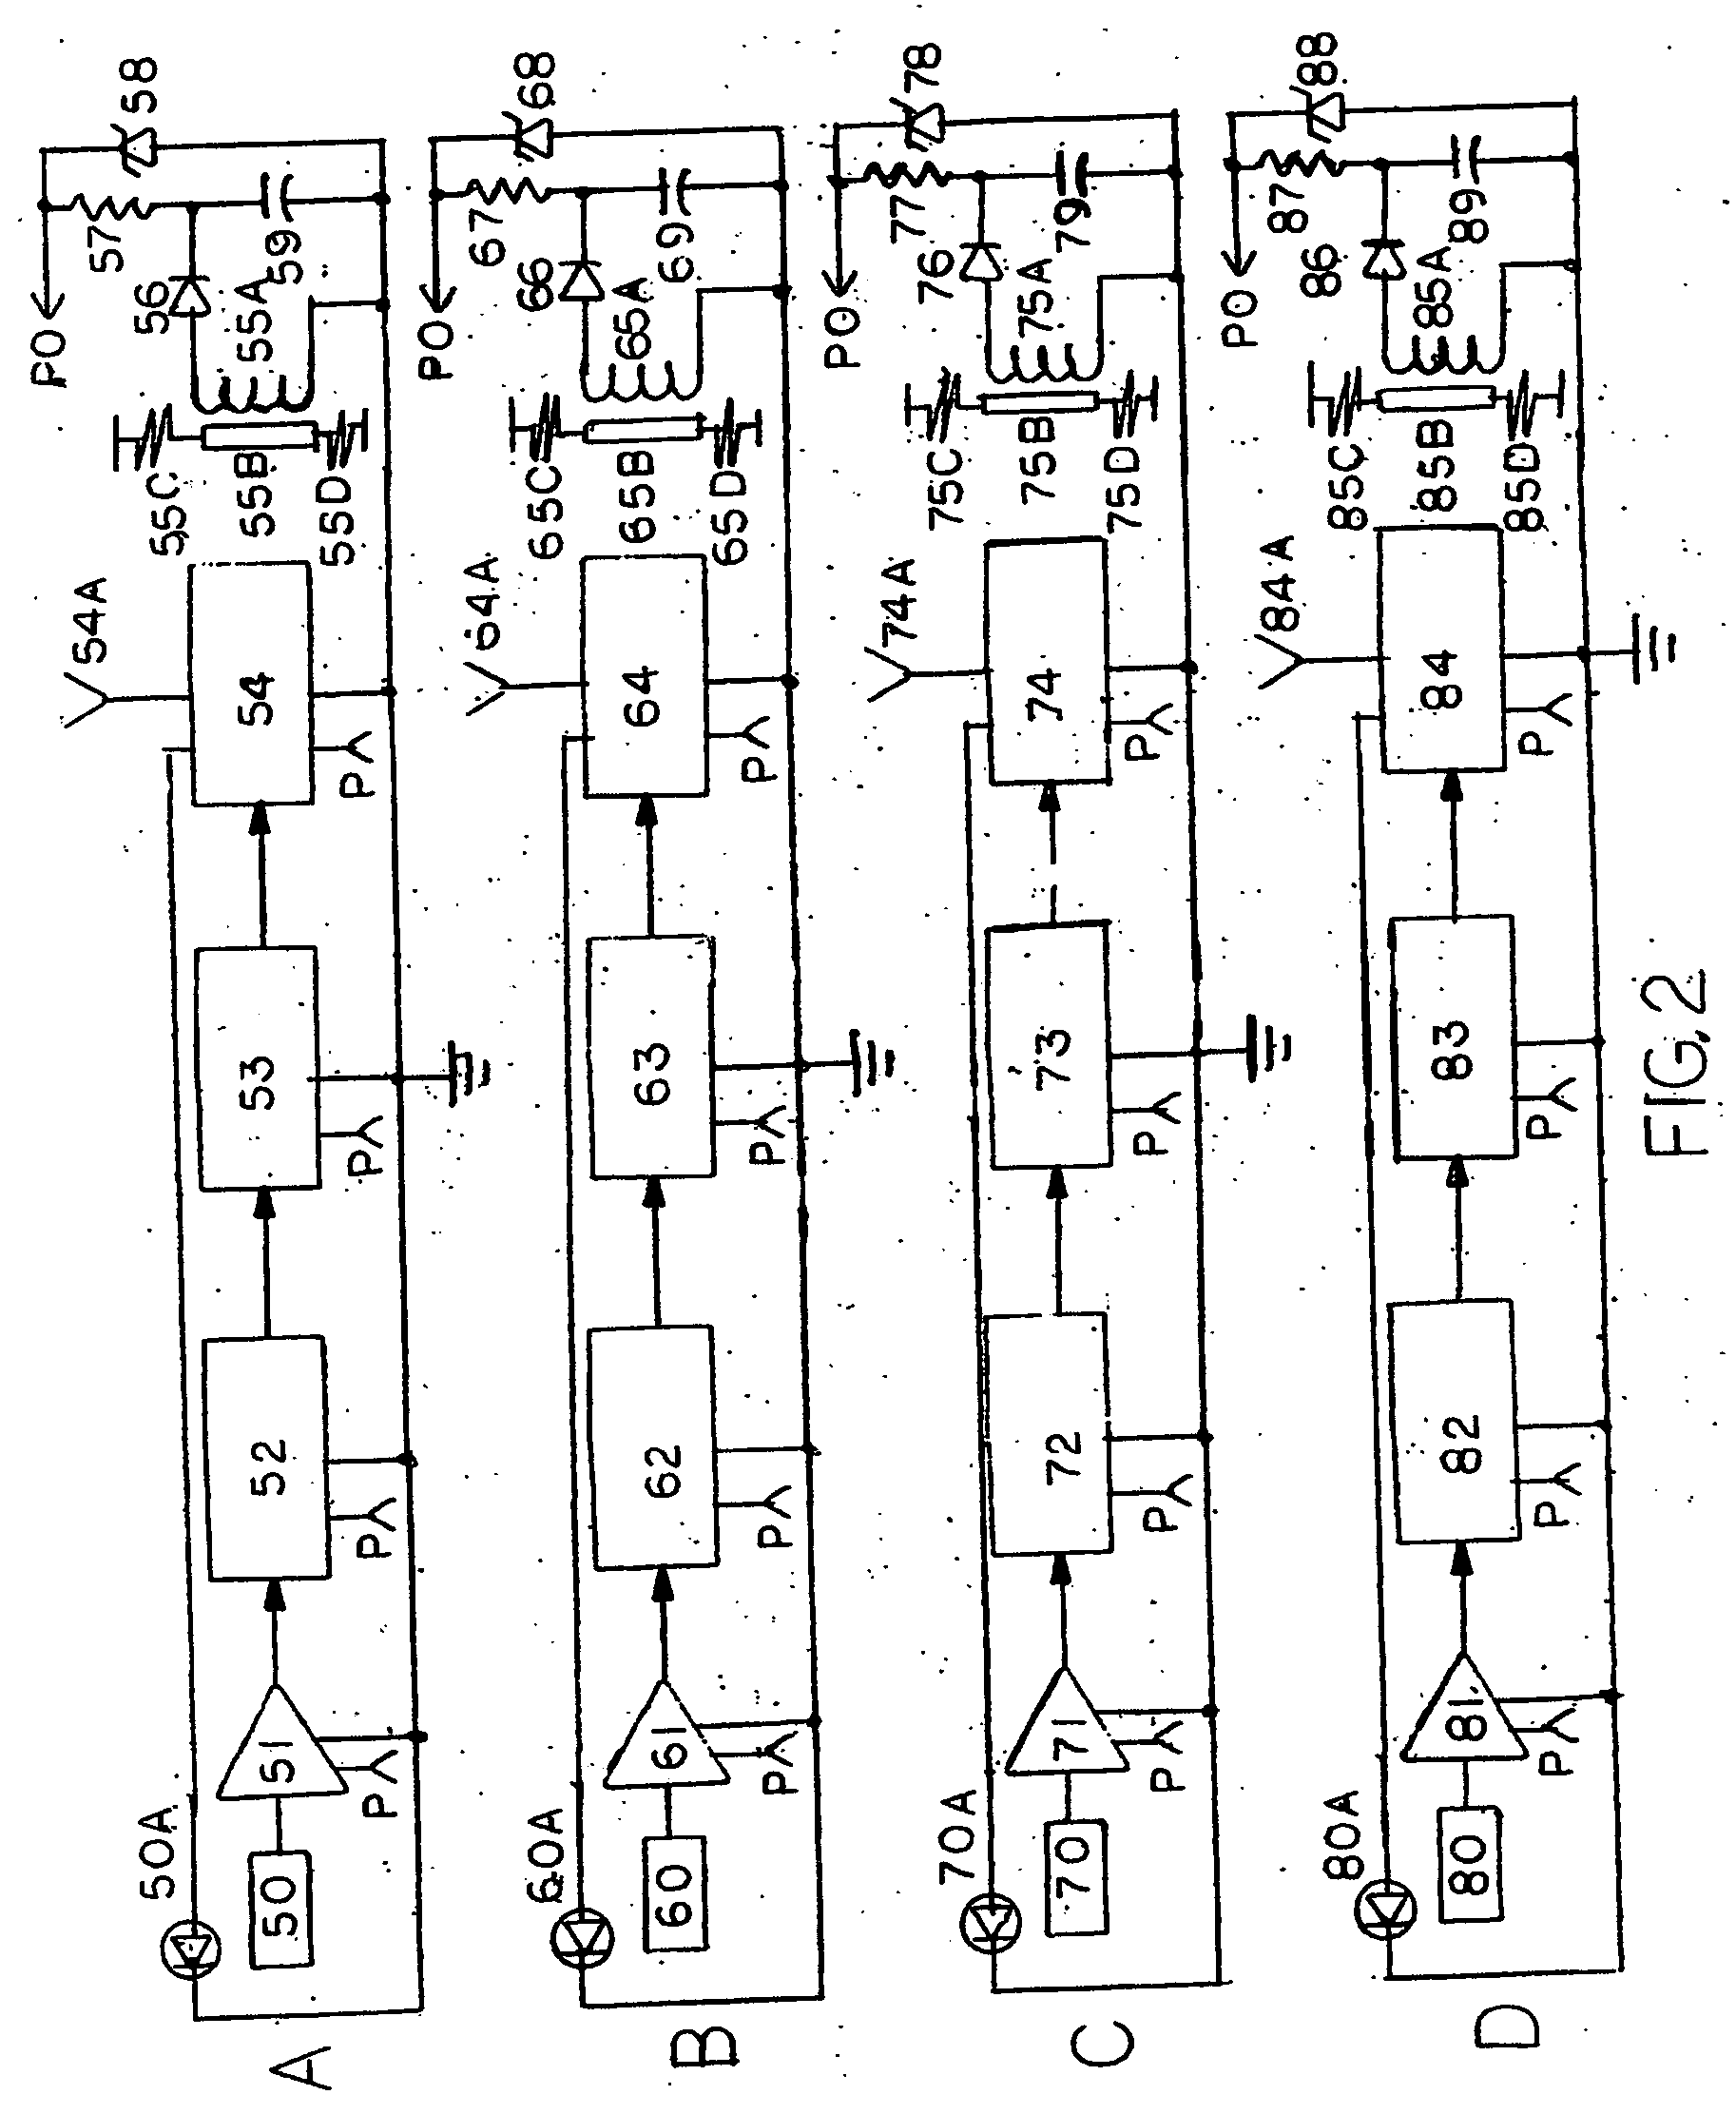 System for monitoring the temperature of wheel bearings in railroad cars